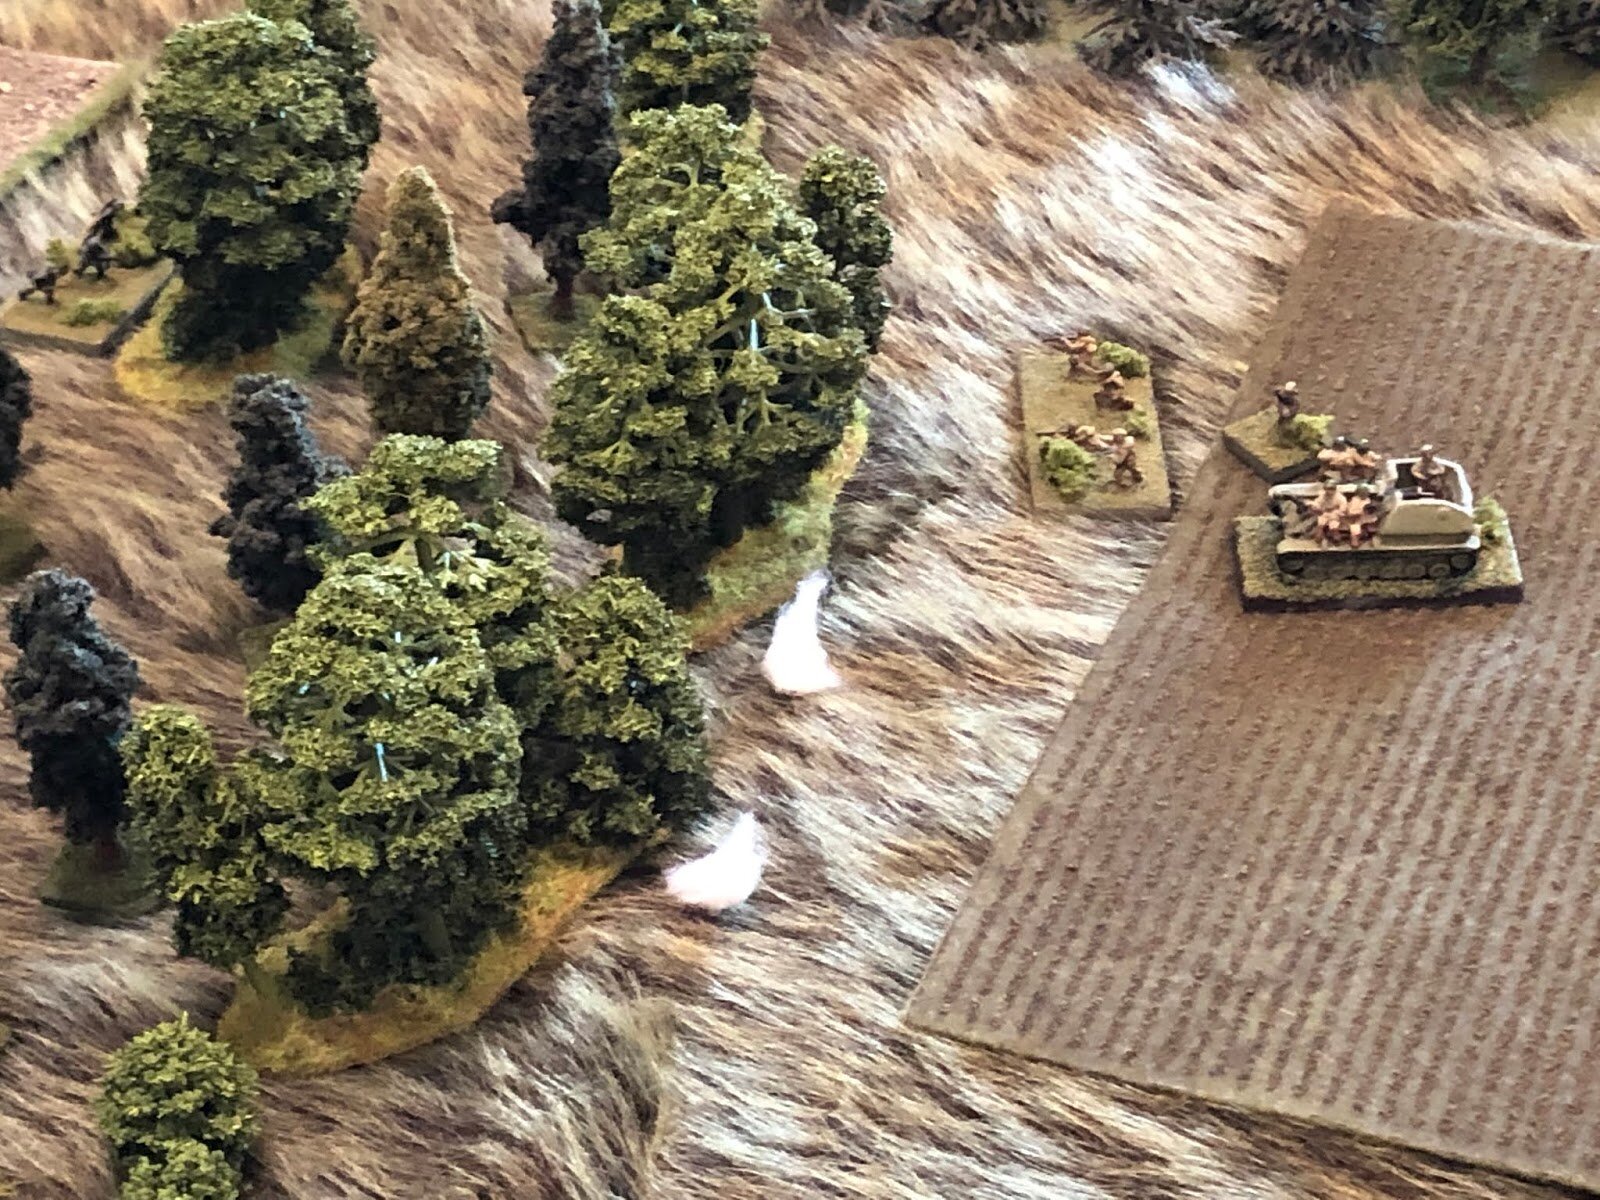  While on the Soviet far right, the Tank Rider Platoon Commander and his 1st Squad dismount just outside the North Wood (you can see the German 1st Squad, 1st Platoon at top left) so far unaware of the nearby German presence. And since there is no im